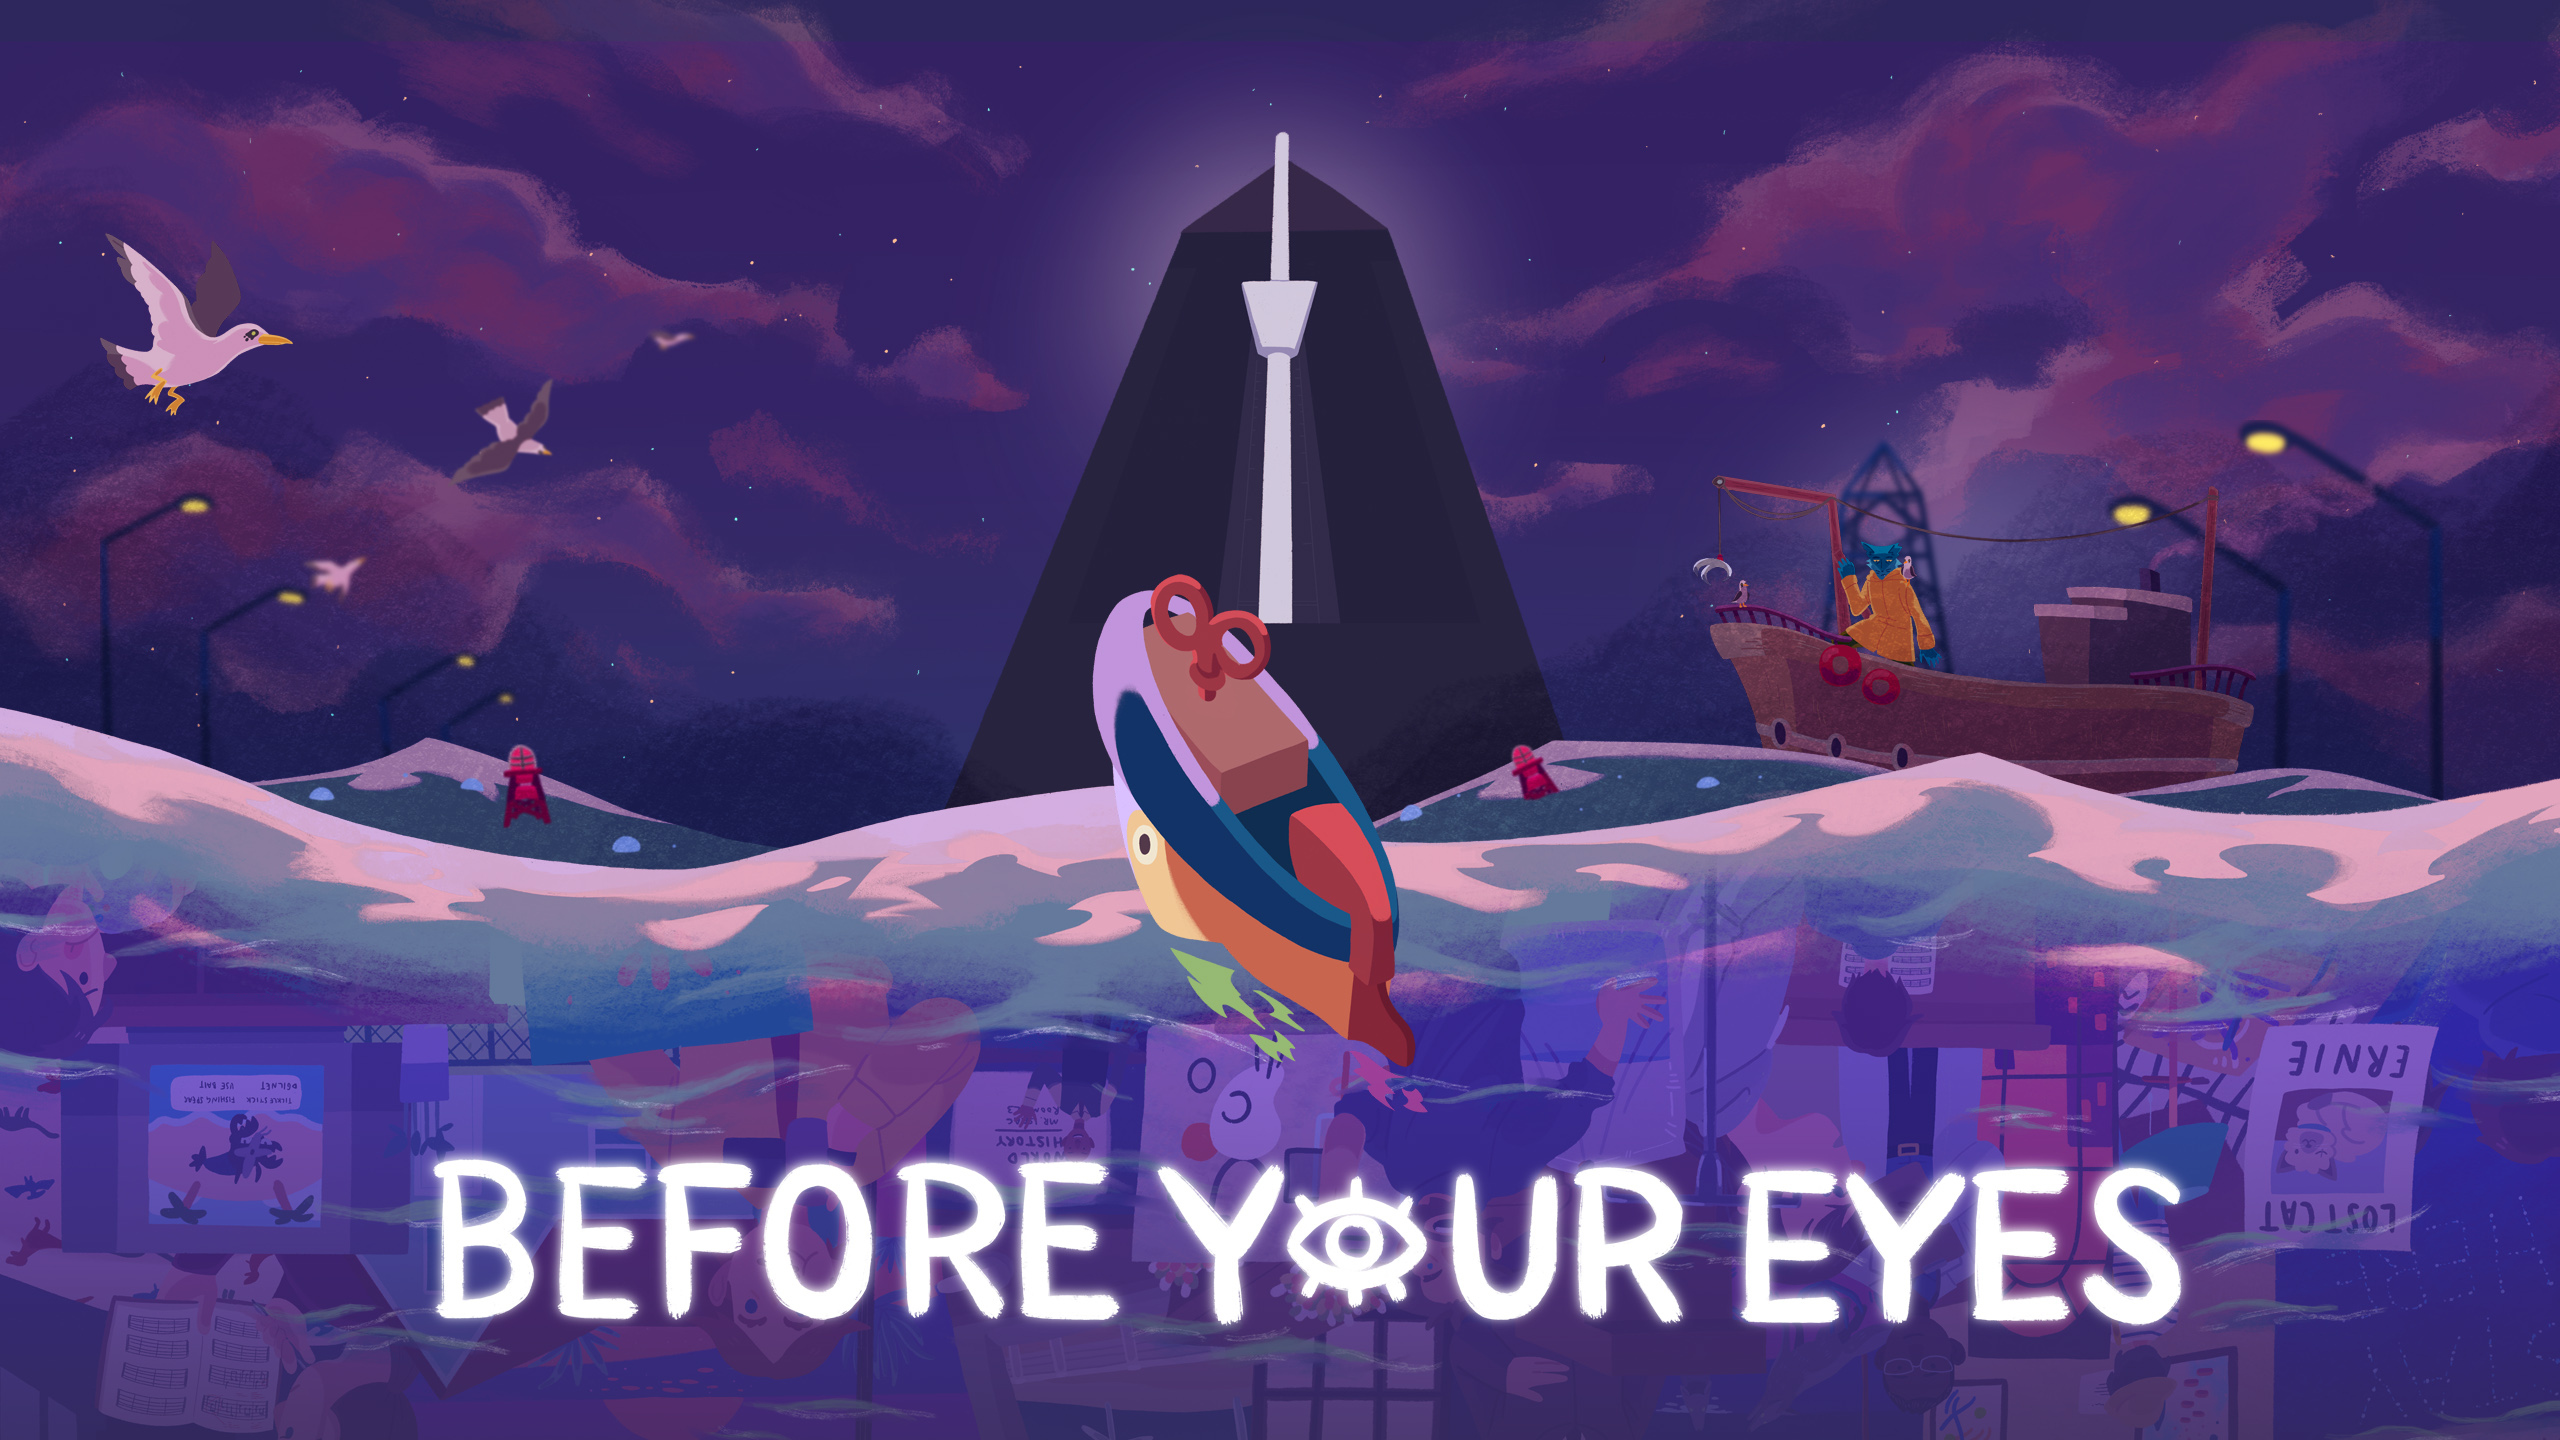 REVIEW: ‘Before Your Eyes’ – the first game controlled by your eyes